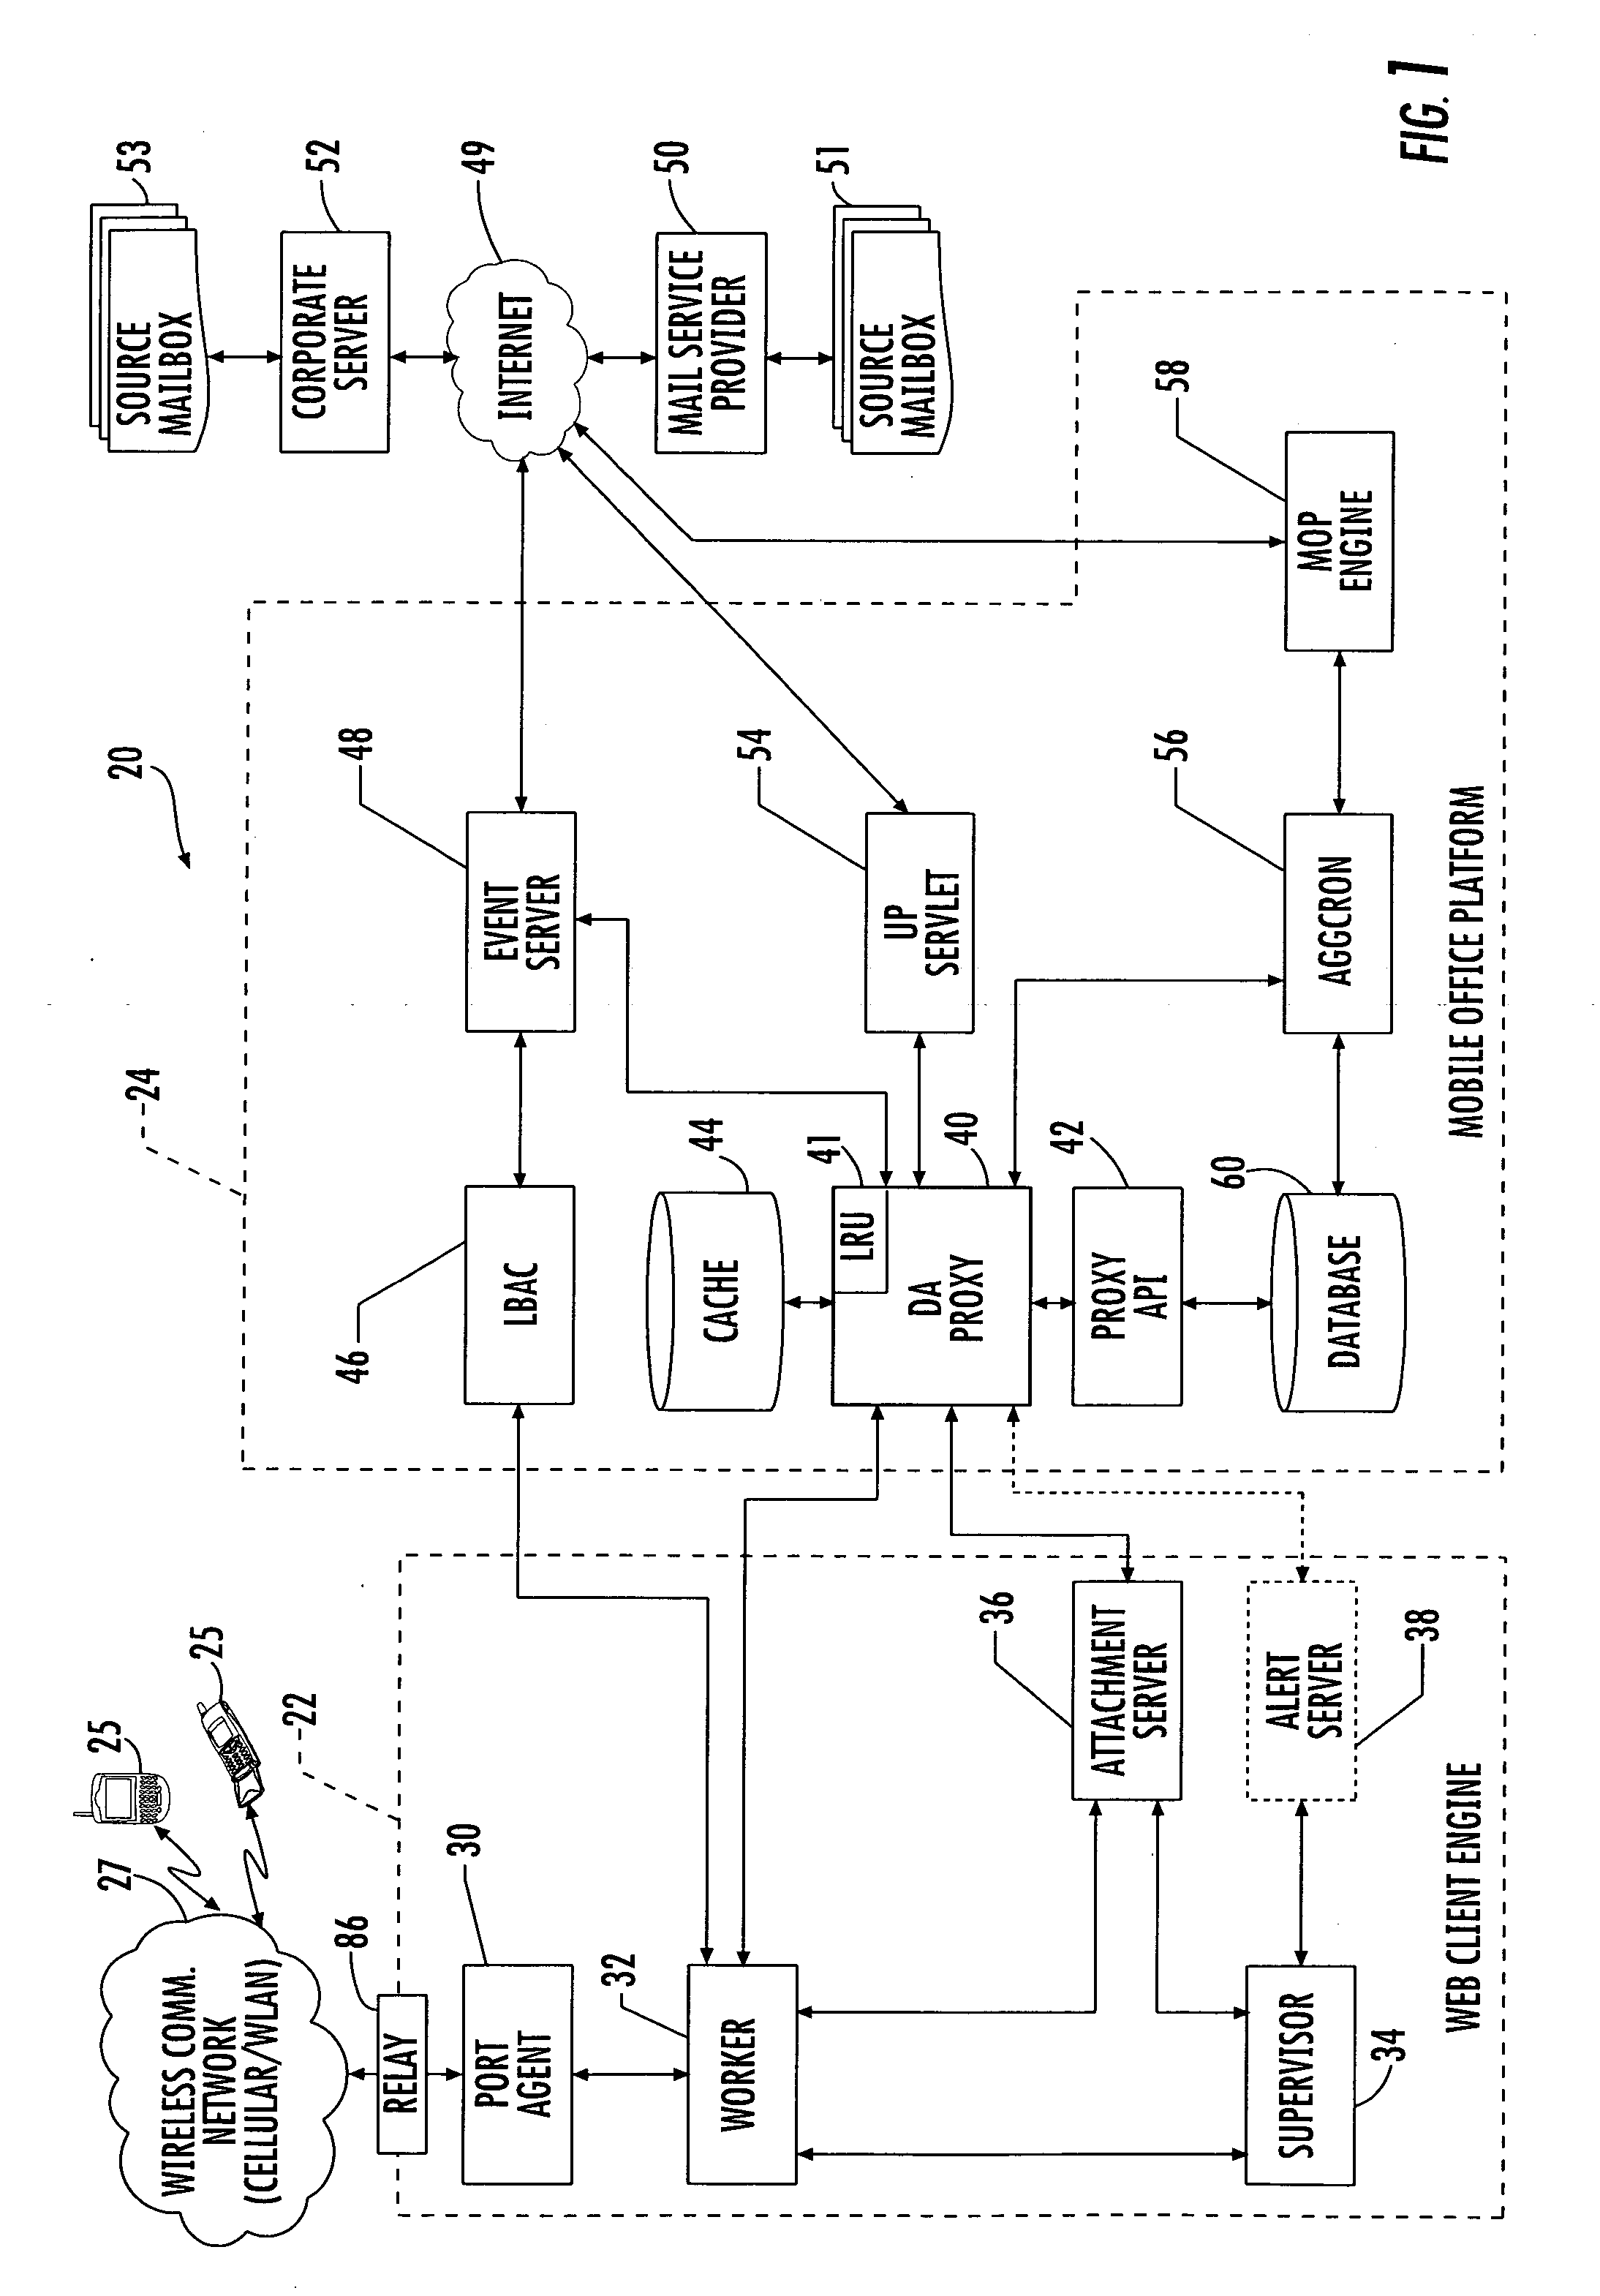 Email server with proxy caching of message identifiers and related methods